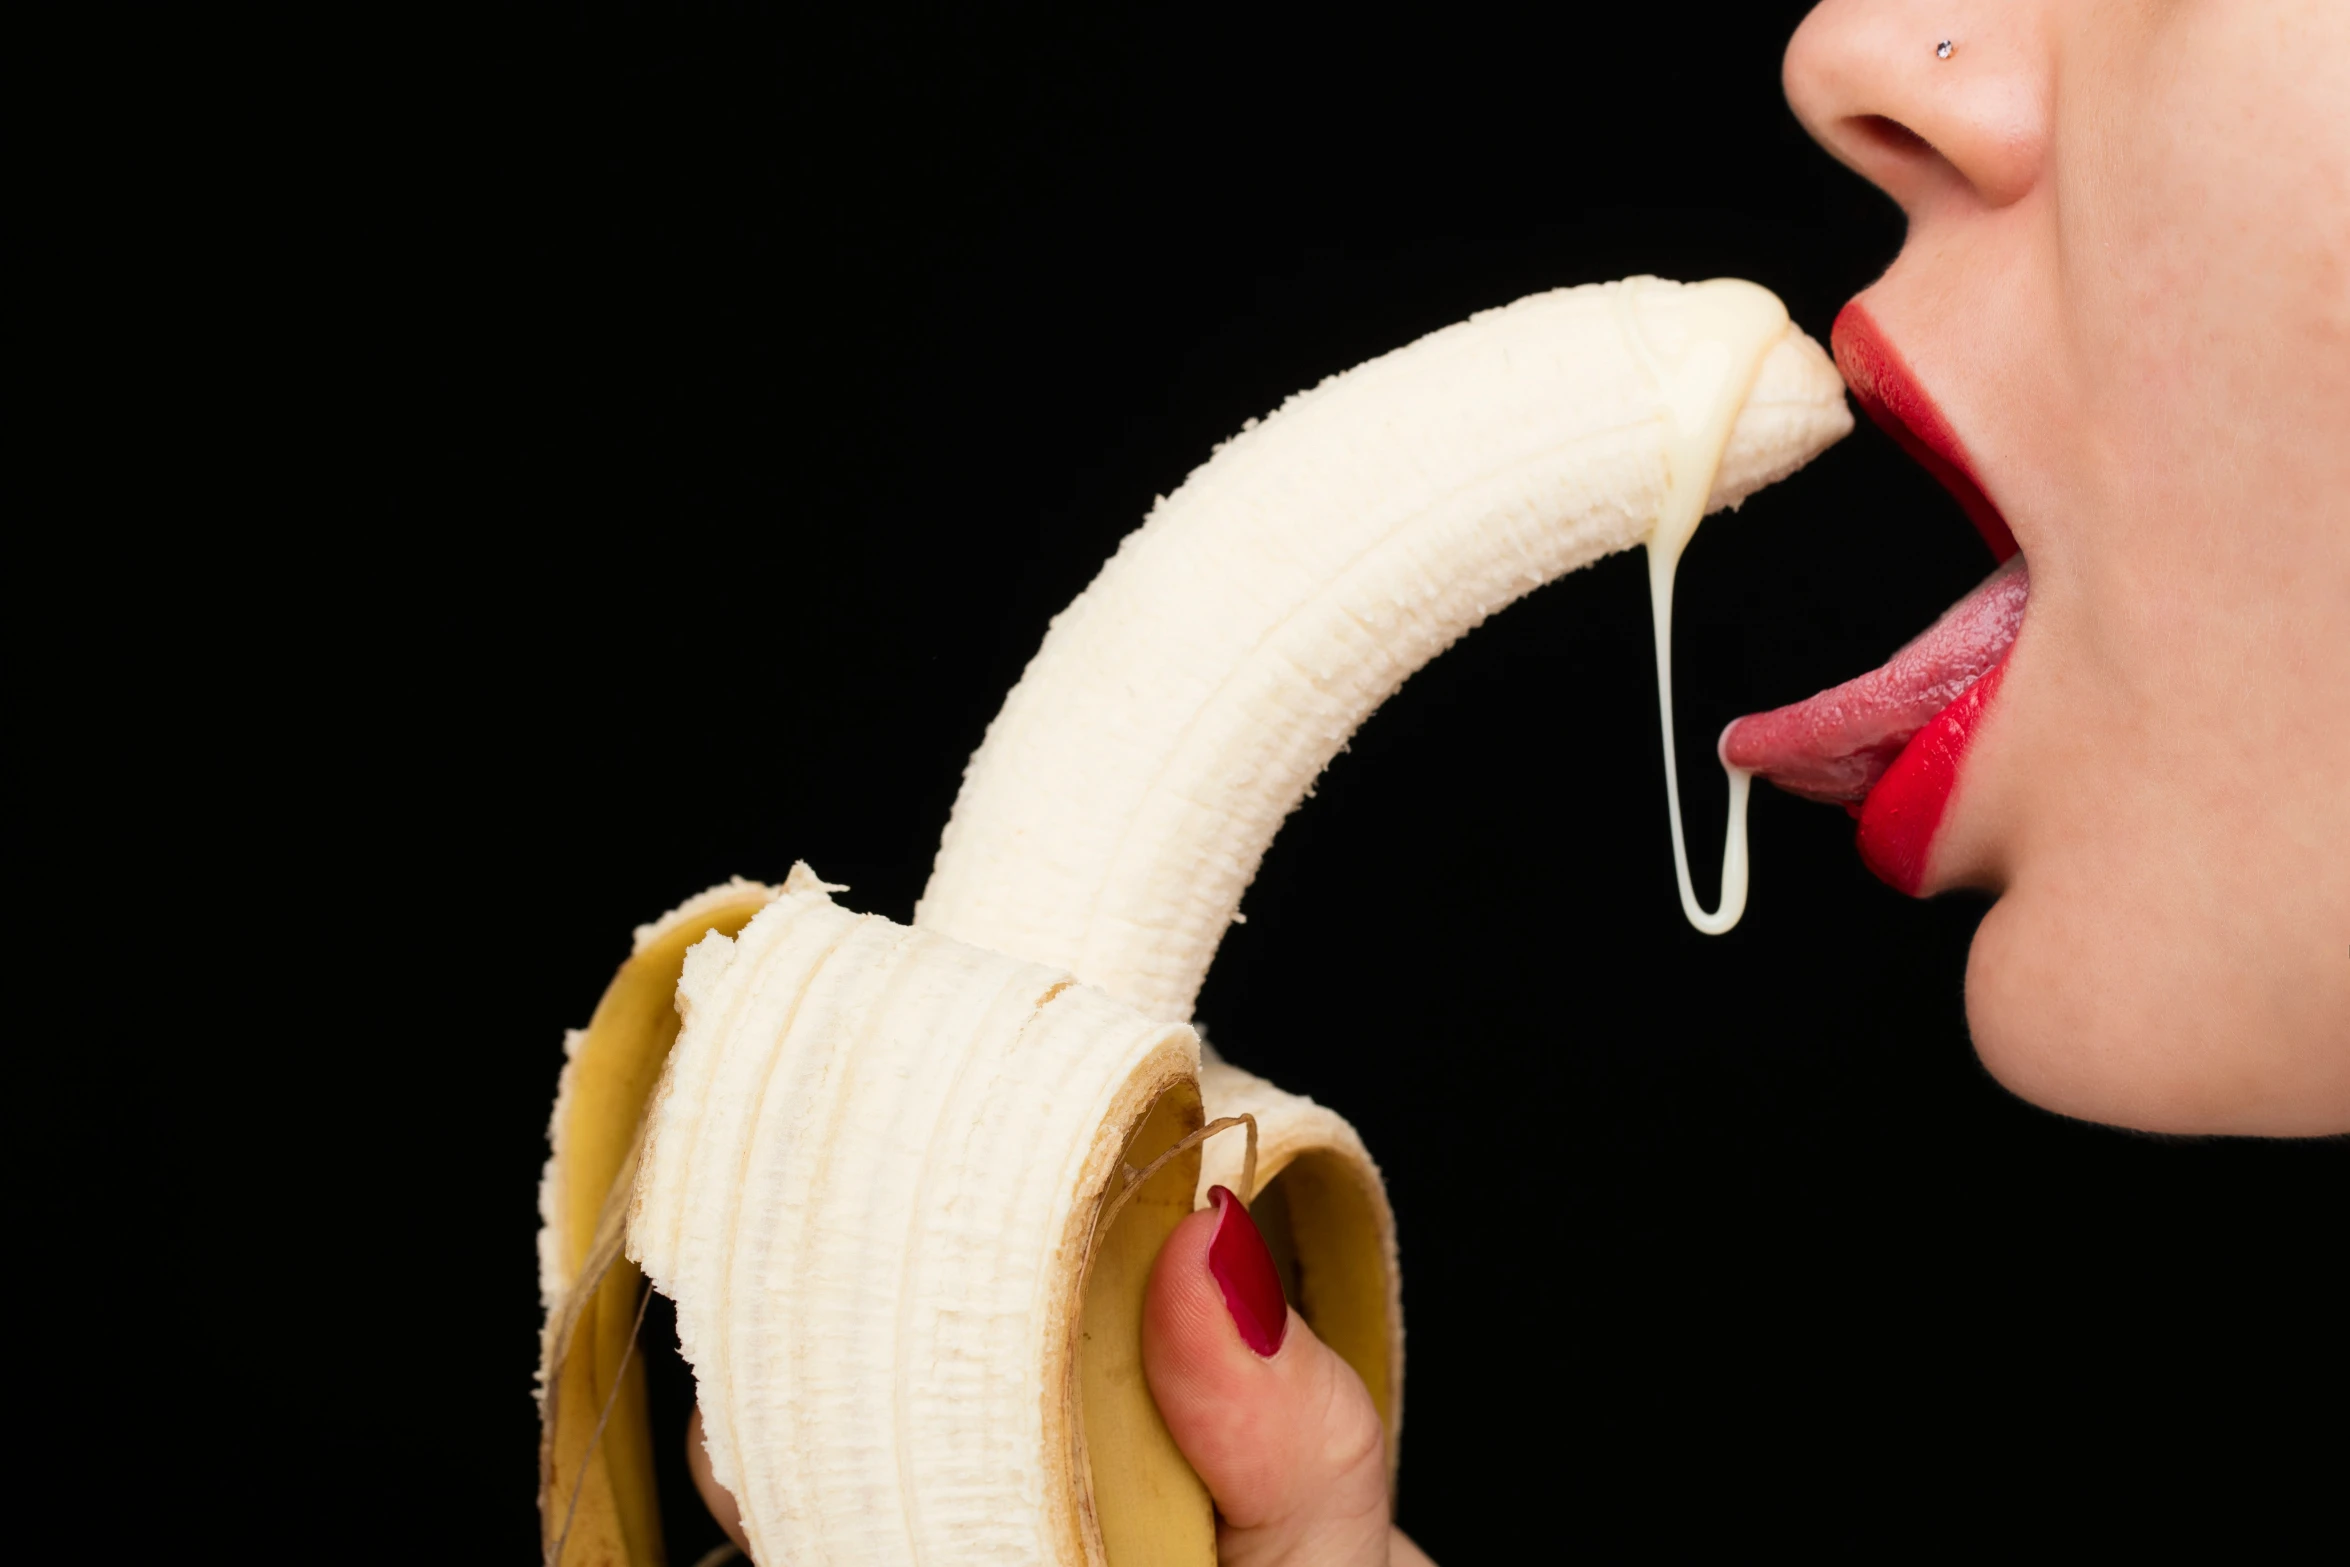 the woman is biting the peeled banana off her mouth